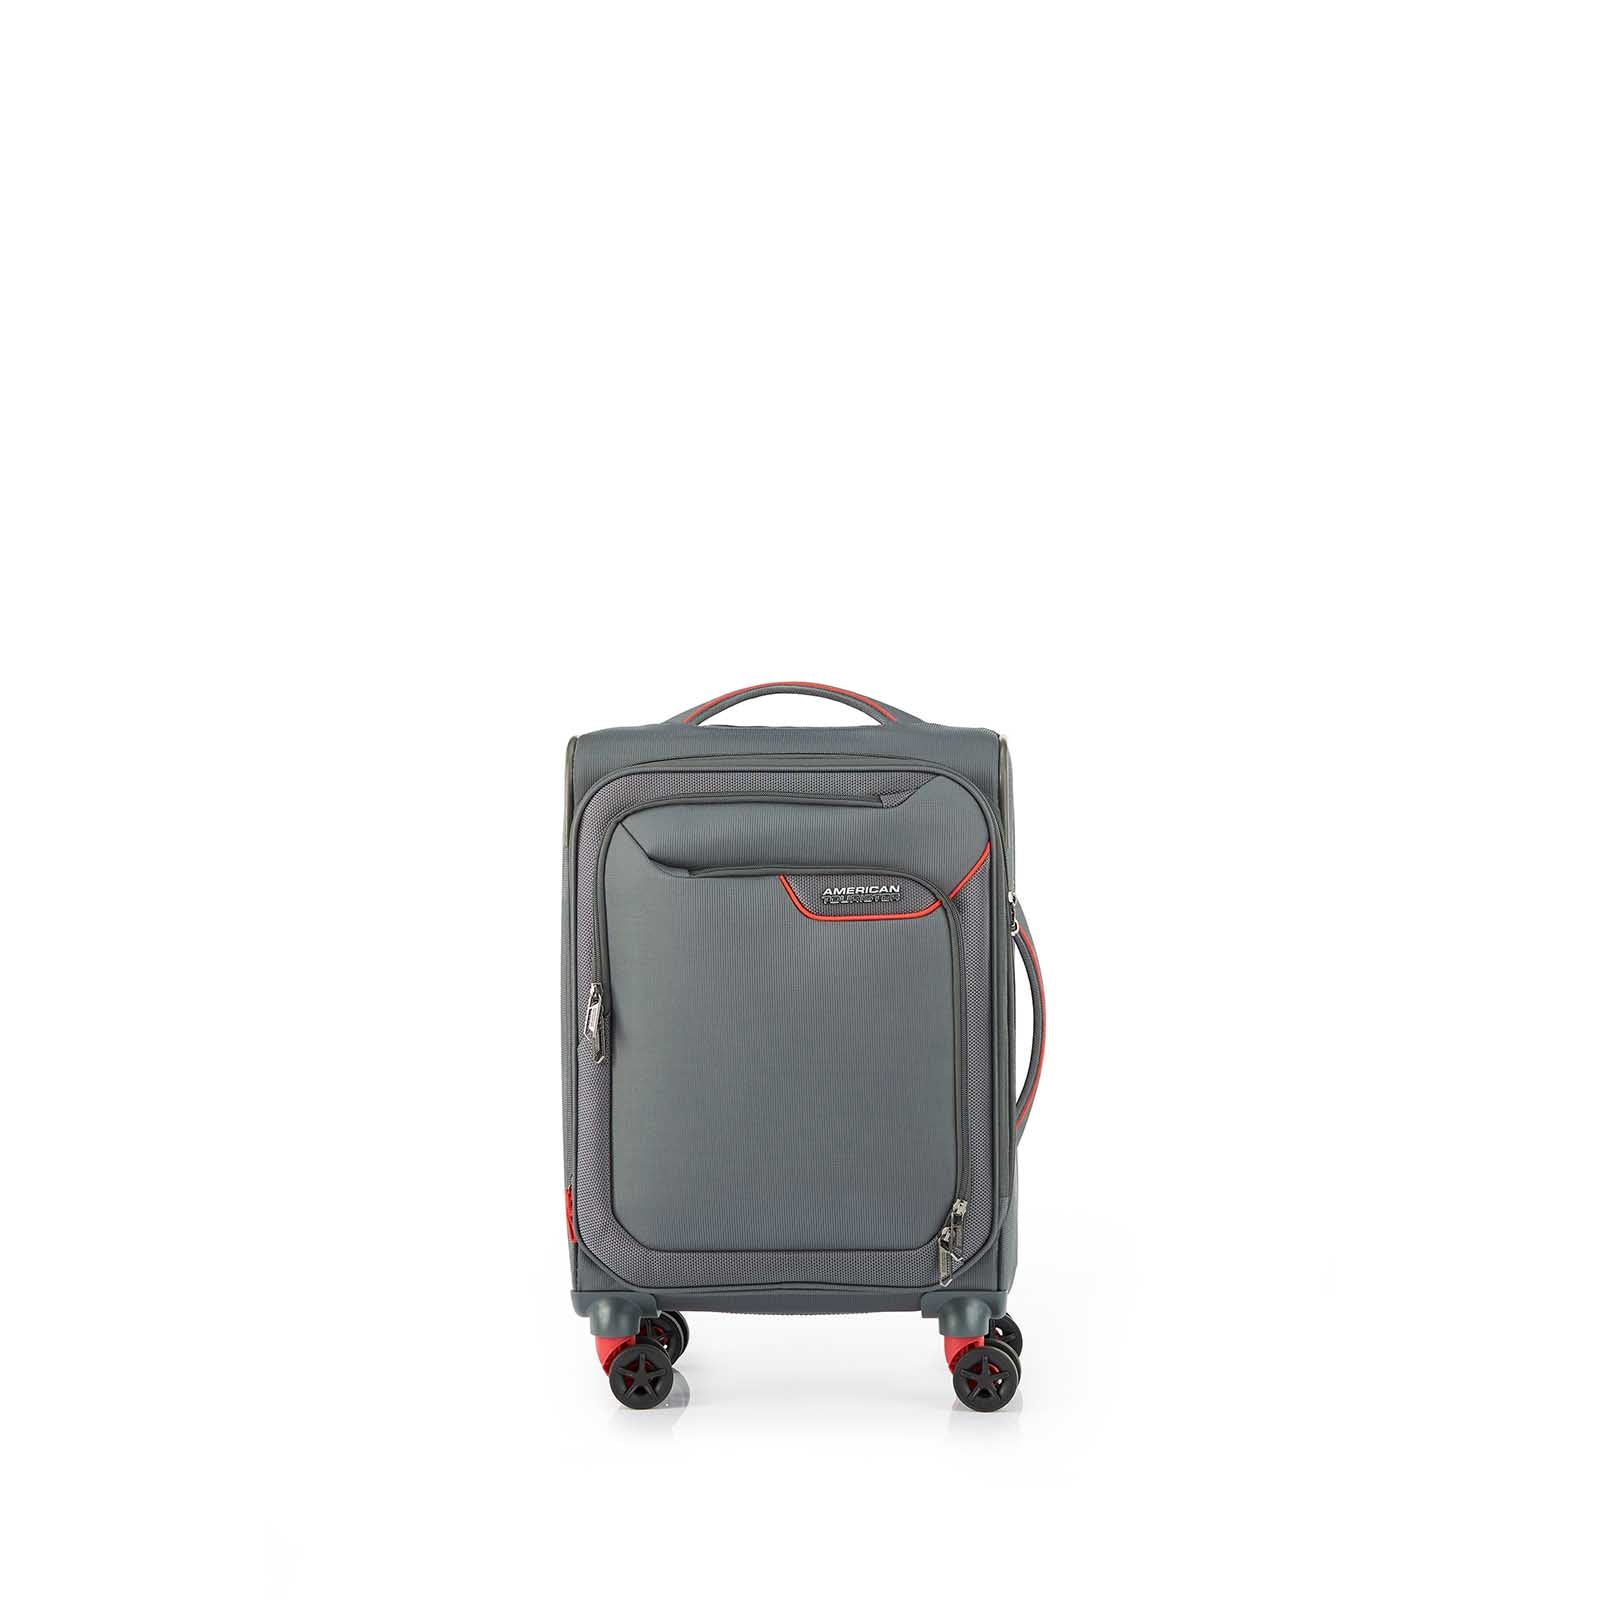 American-Tourister-Applite-4-Eco-55cm-Carry-On-Suitcase-Grey-Red-Front